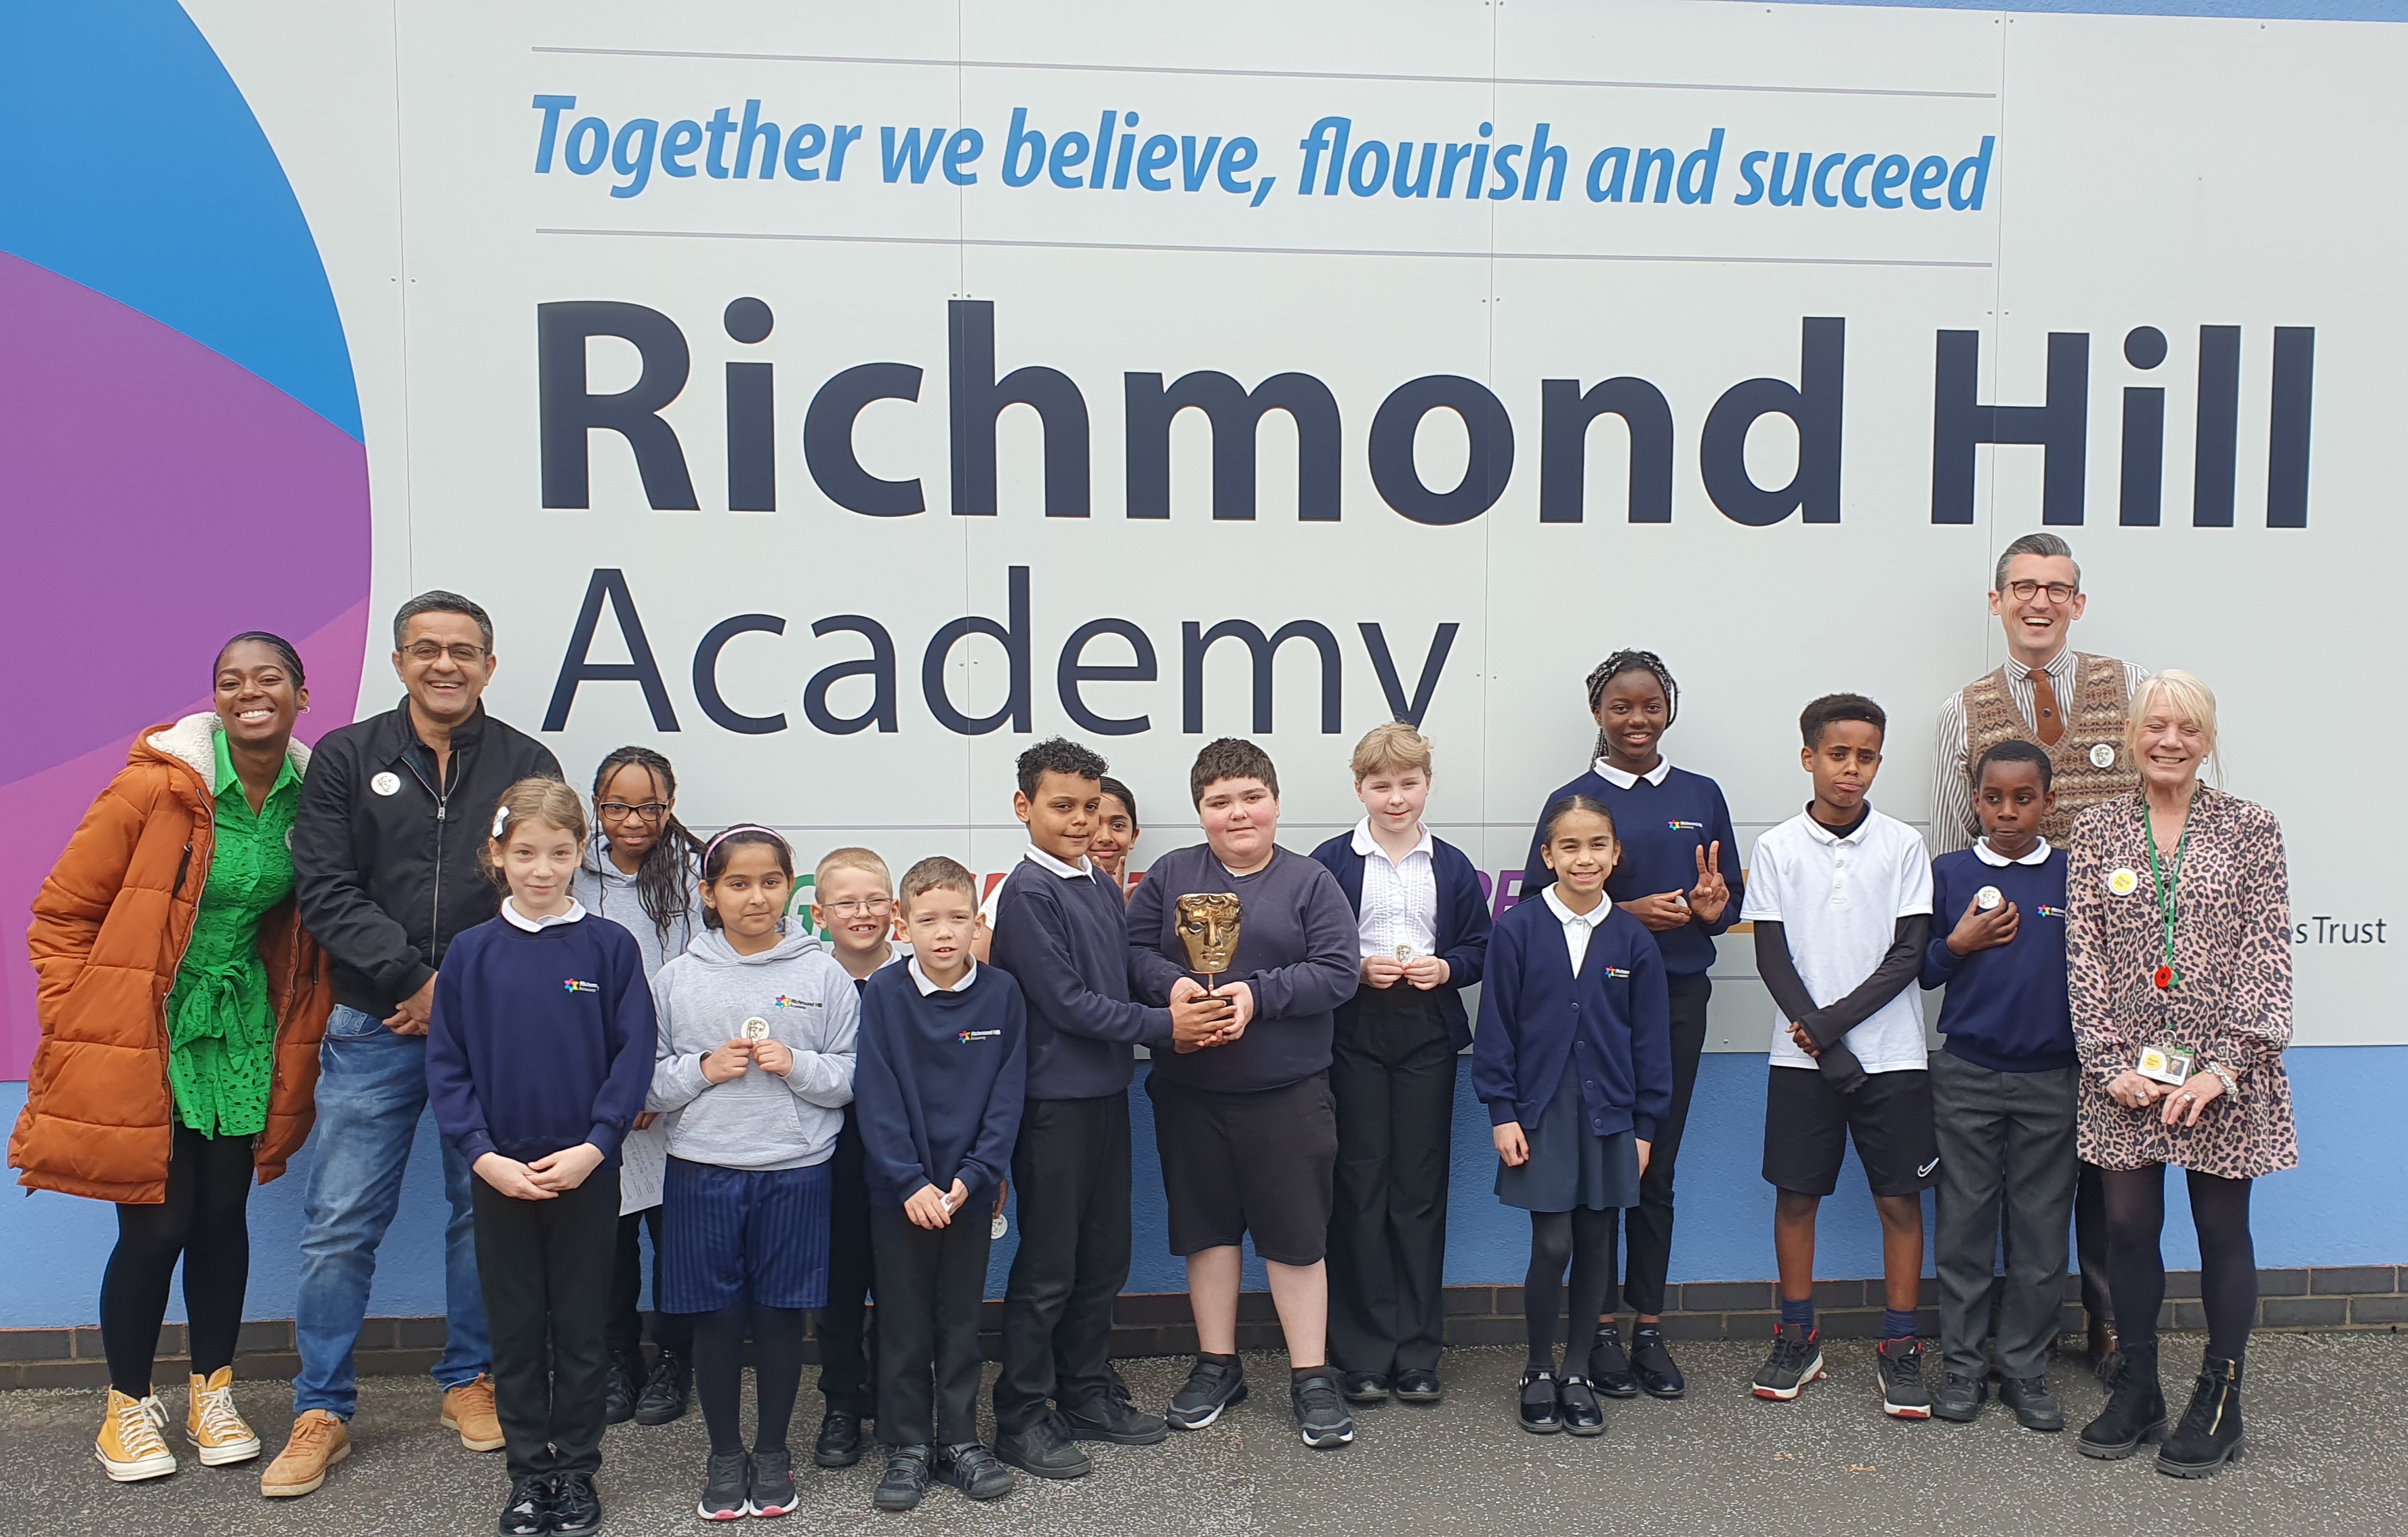 Shanequa Paris (left), Waqar Ahmed, and Ben Shires (right) standing in front of the Richmond Hill Academy sign with pupils. Two children are smiling while holding the BAFTA trophy.